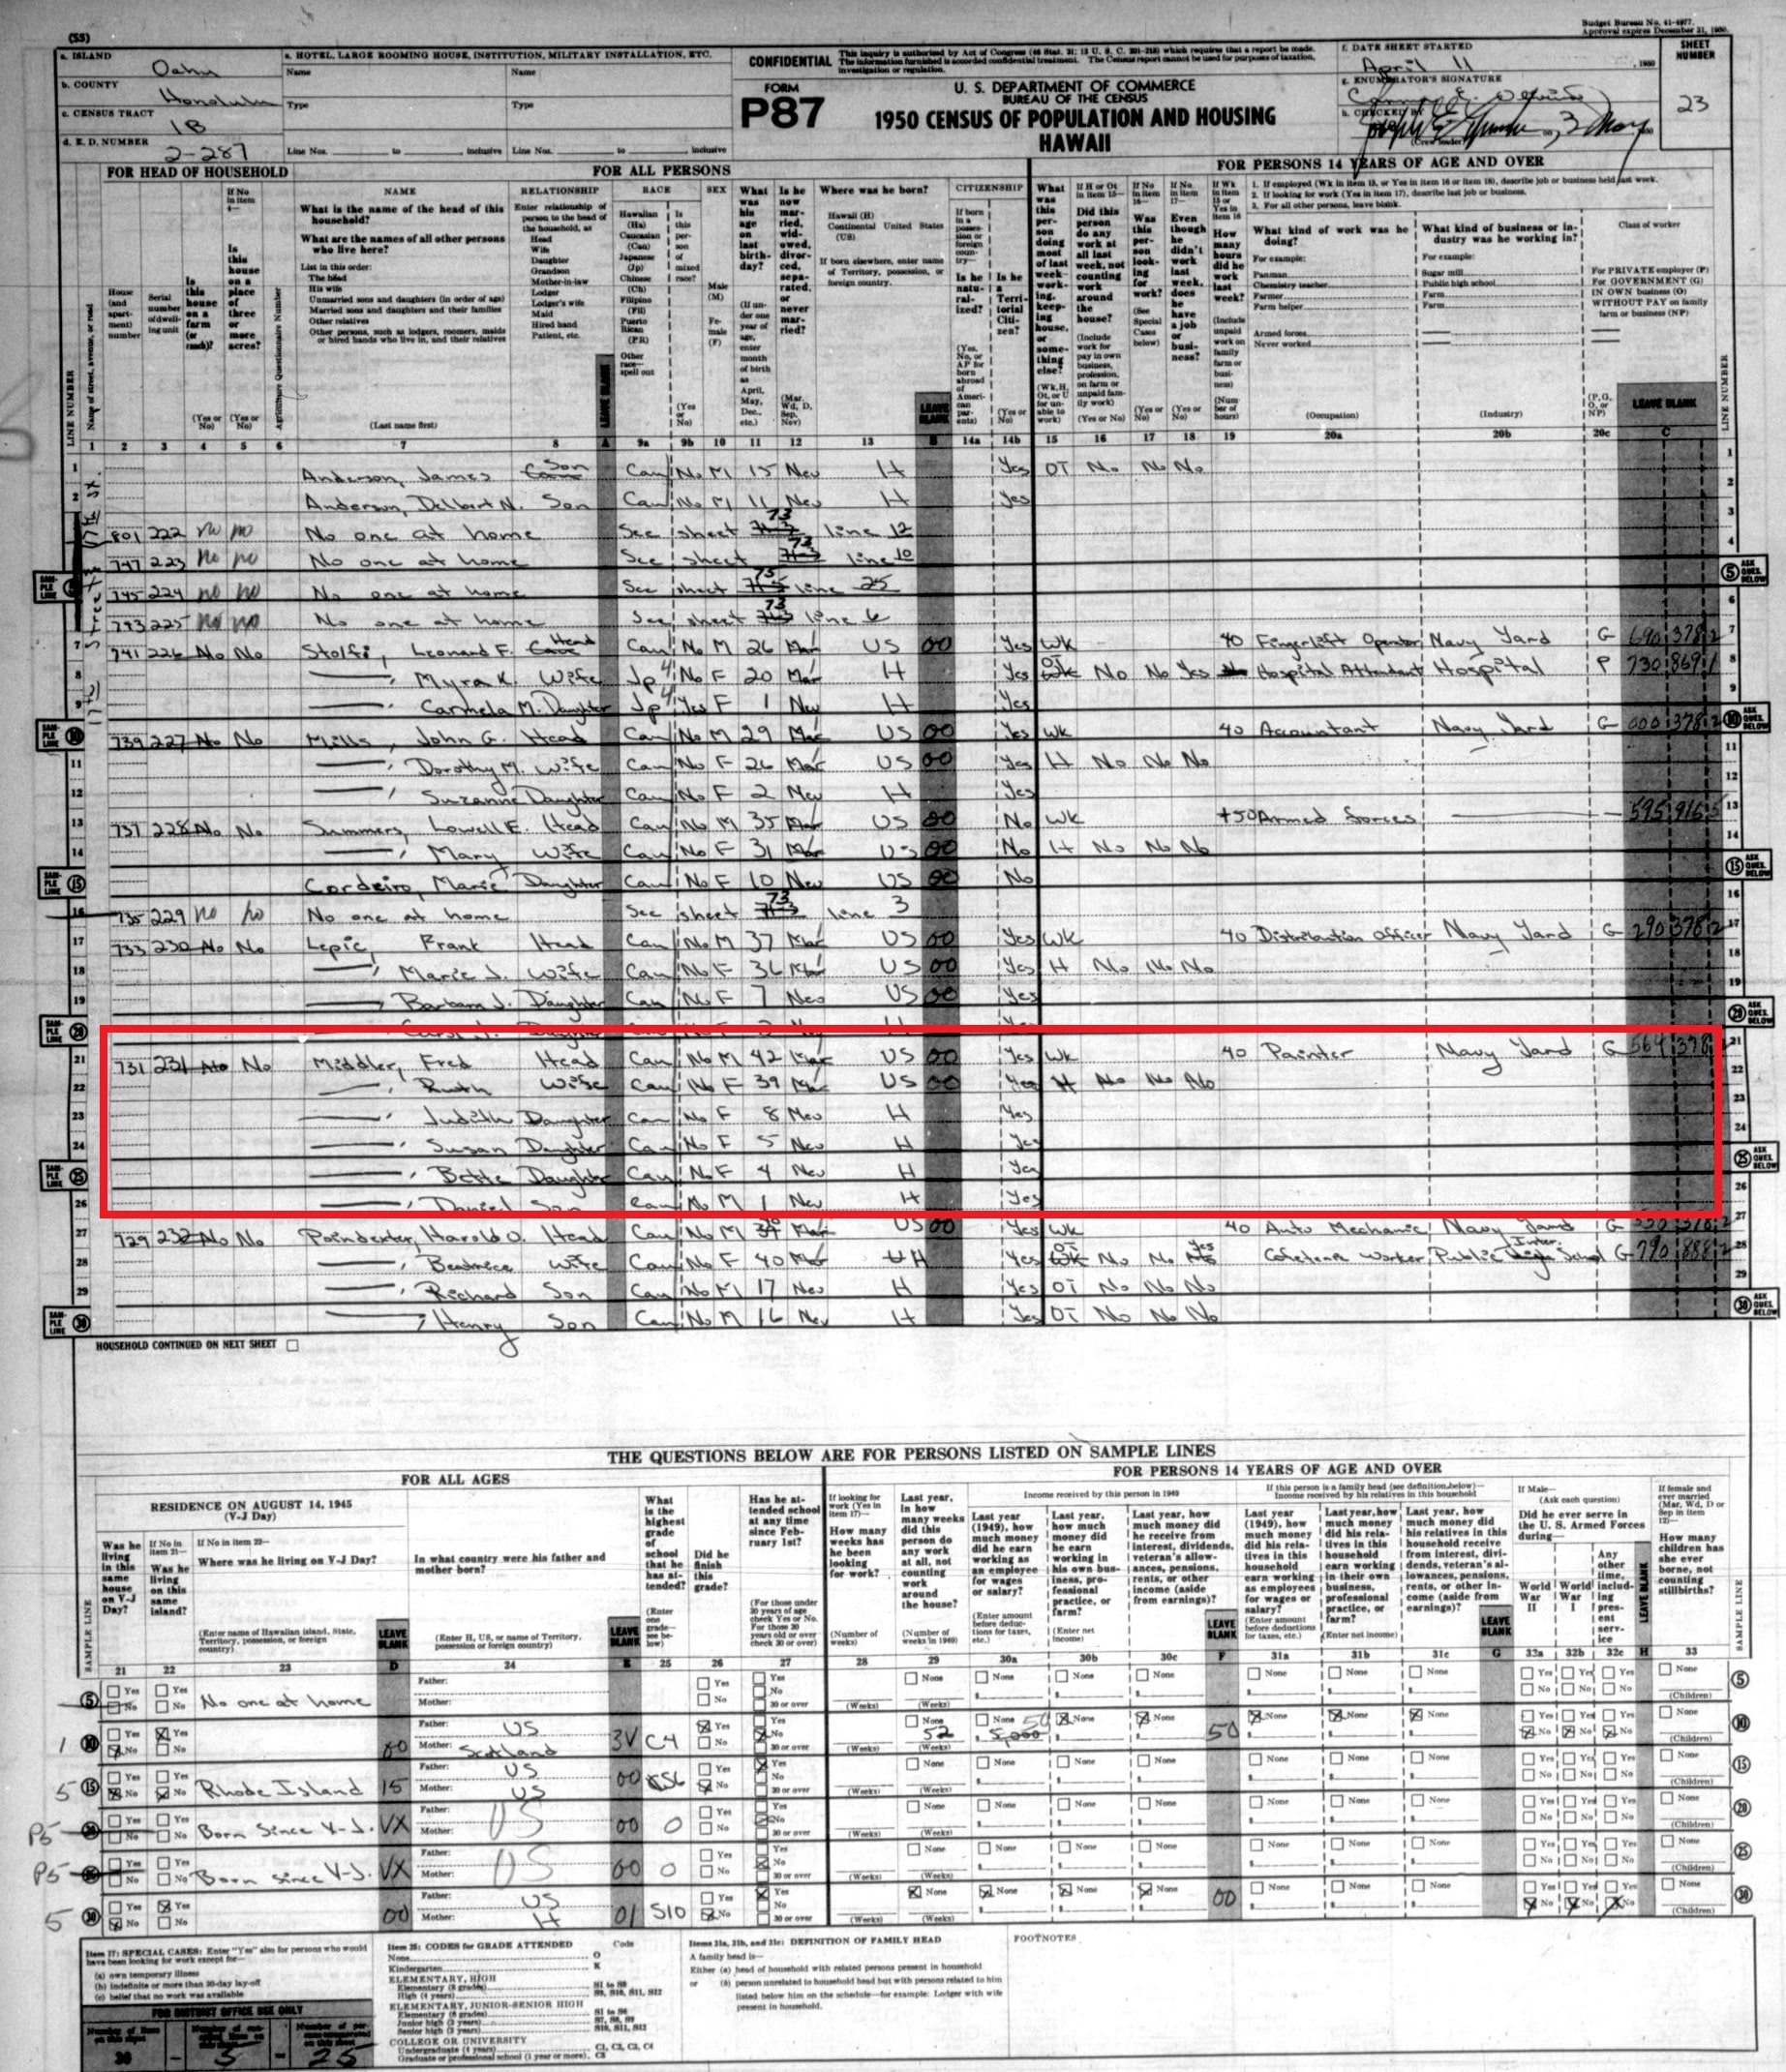 Census record of Bette Midler [Credit: MyHeritage 1950 United States Federal Census]